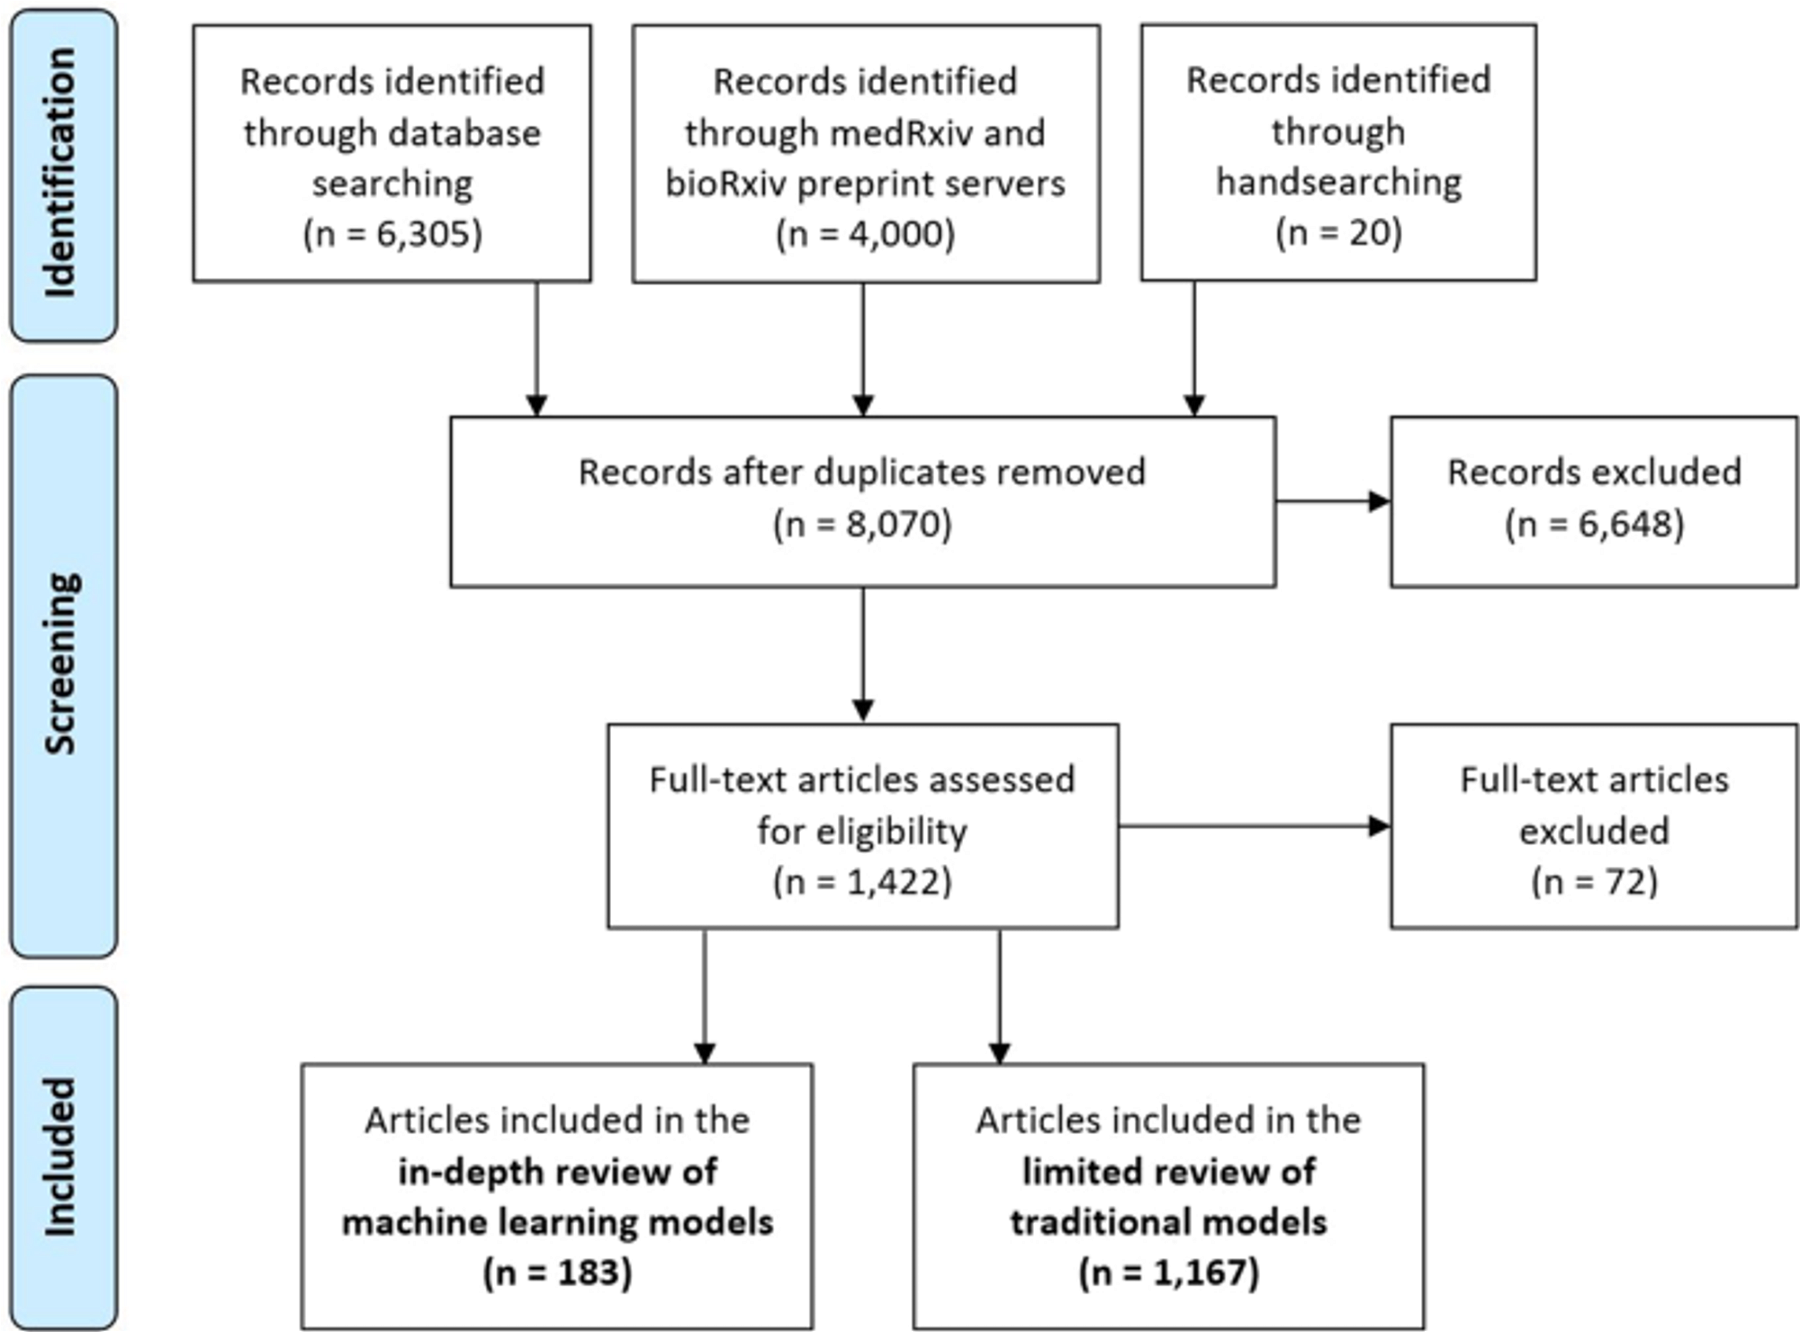 Leveraging artificial intelligence for pandemic preparedness and response: a scoping review to identify key use cases - npj Digital Medicine